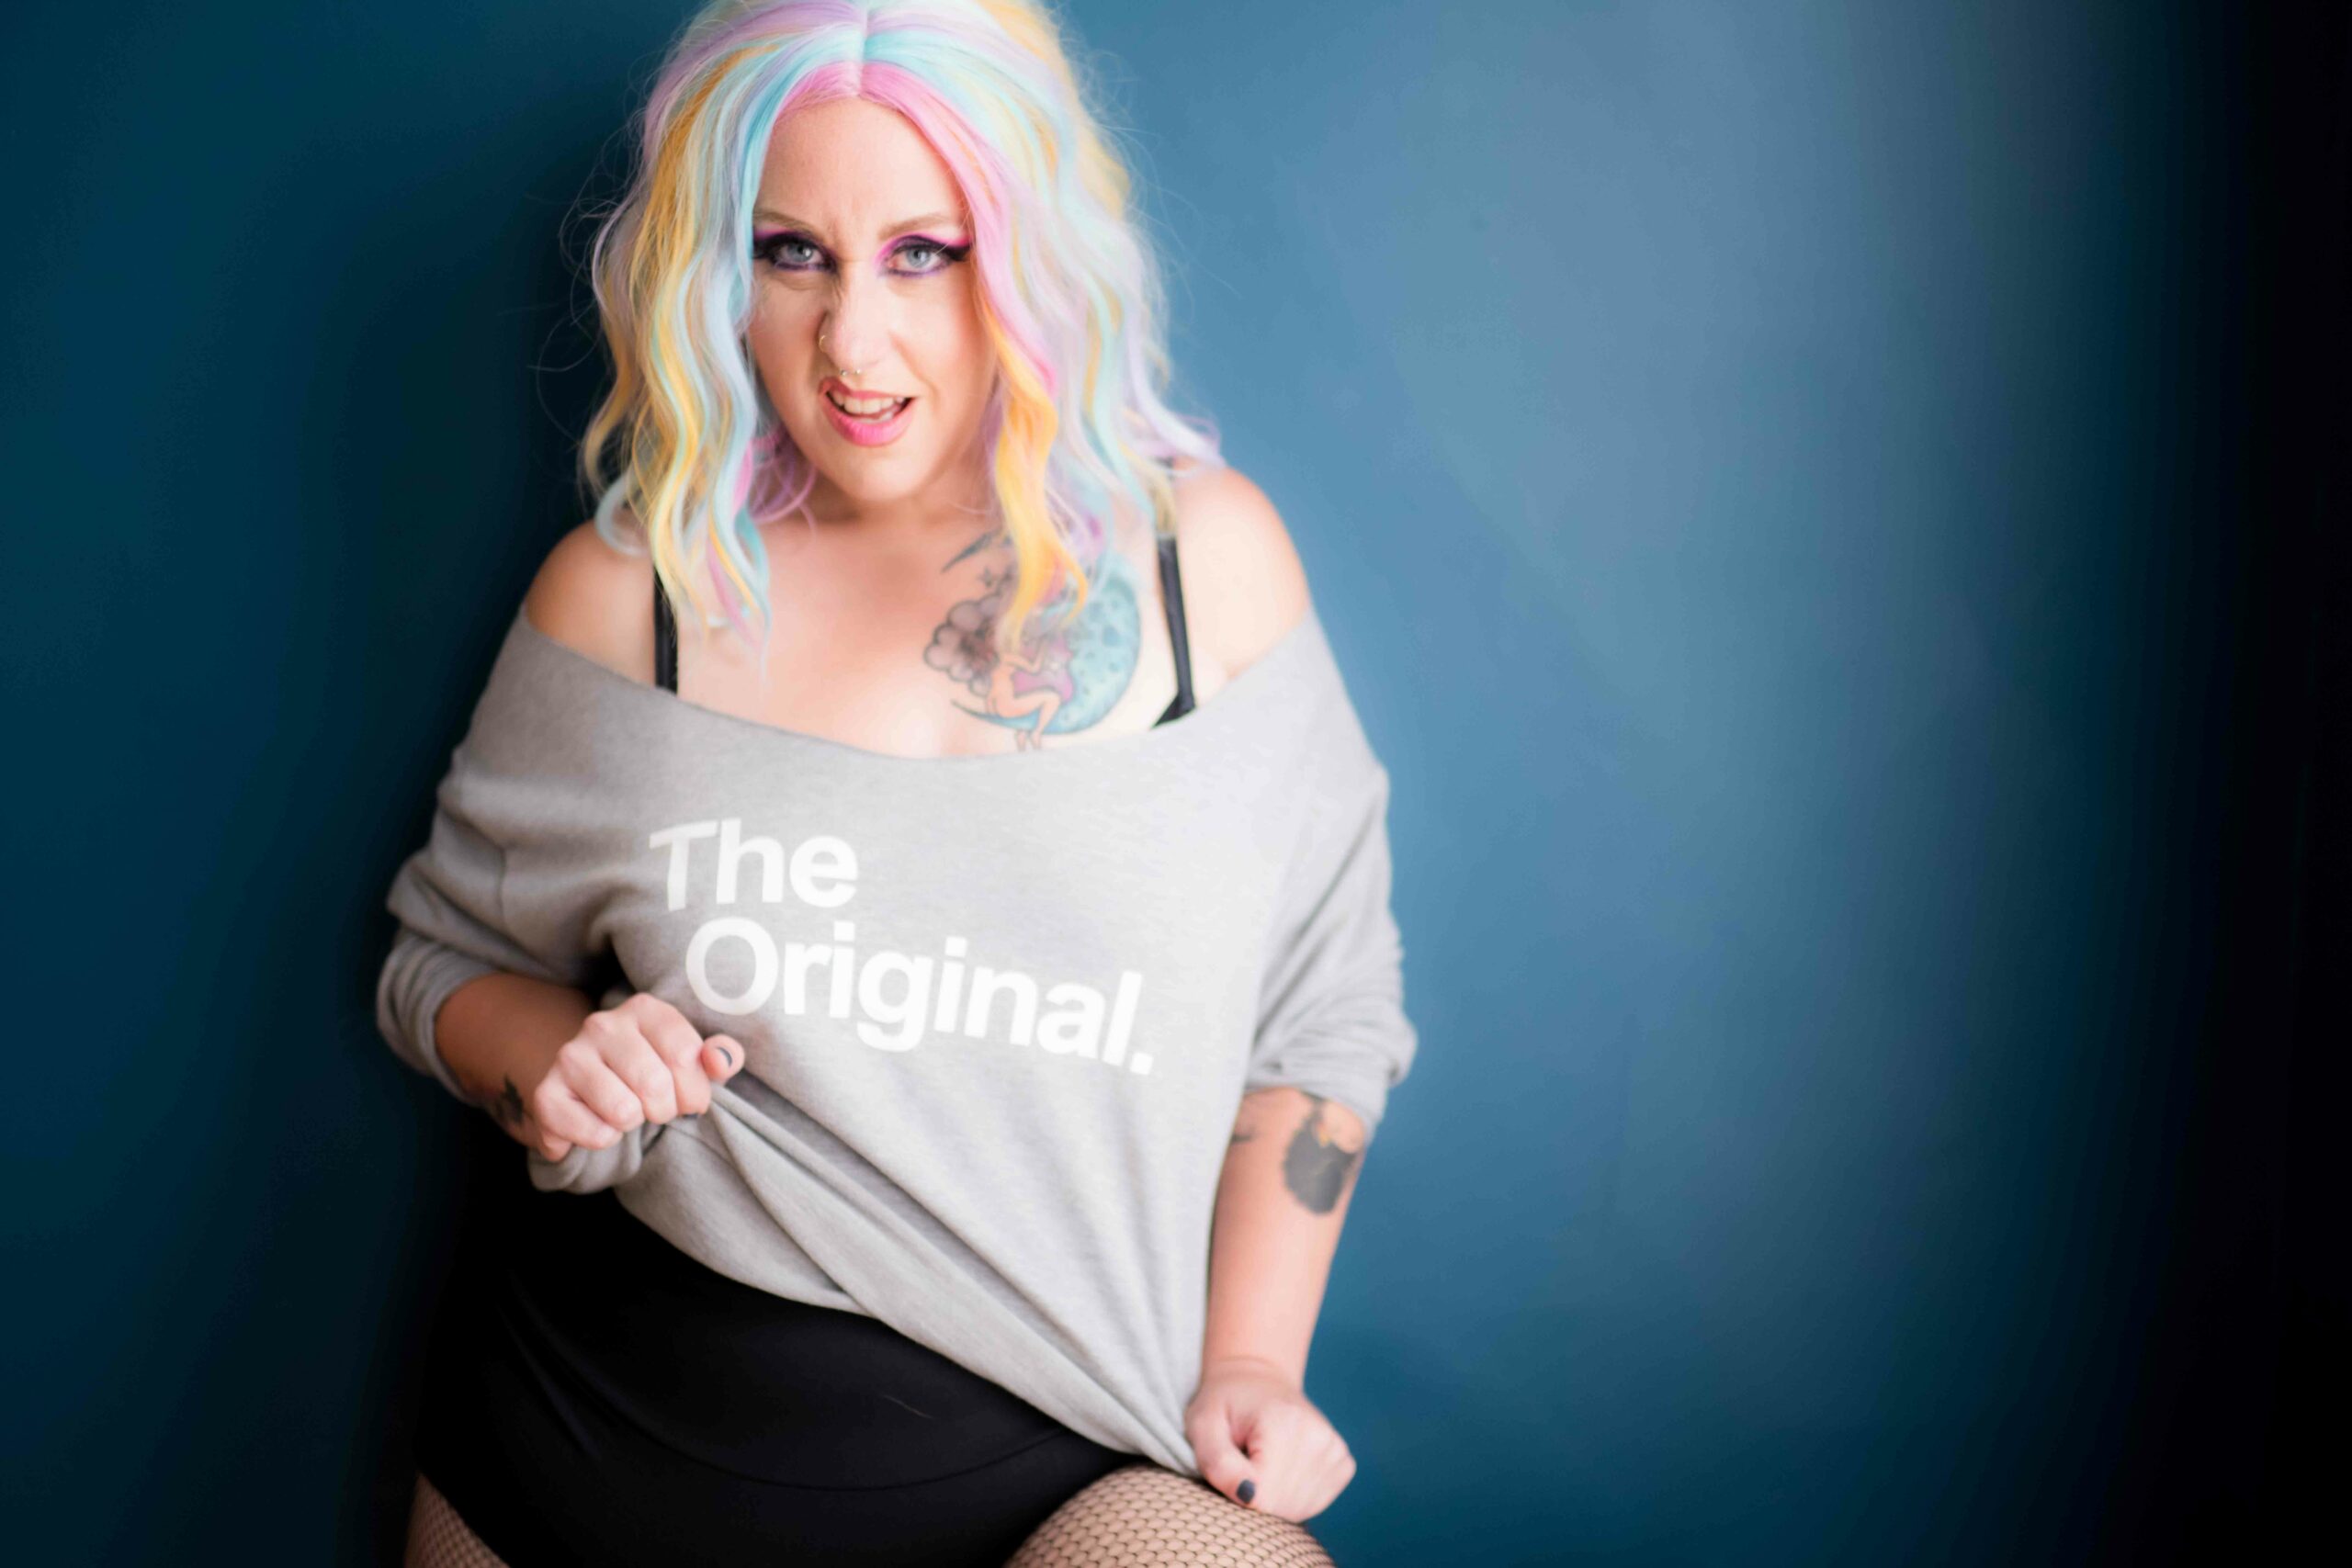 Photo of a woman with different colored strips on her hair. She's wearing a top with "The Original" text print.